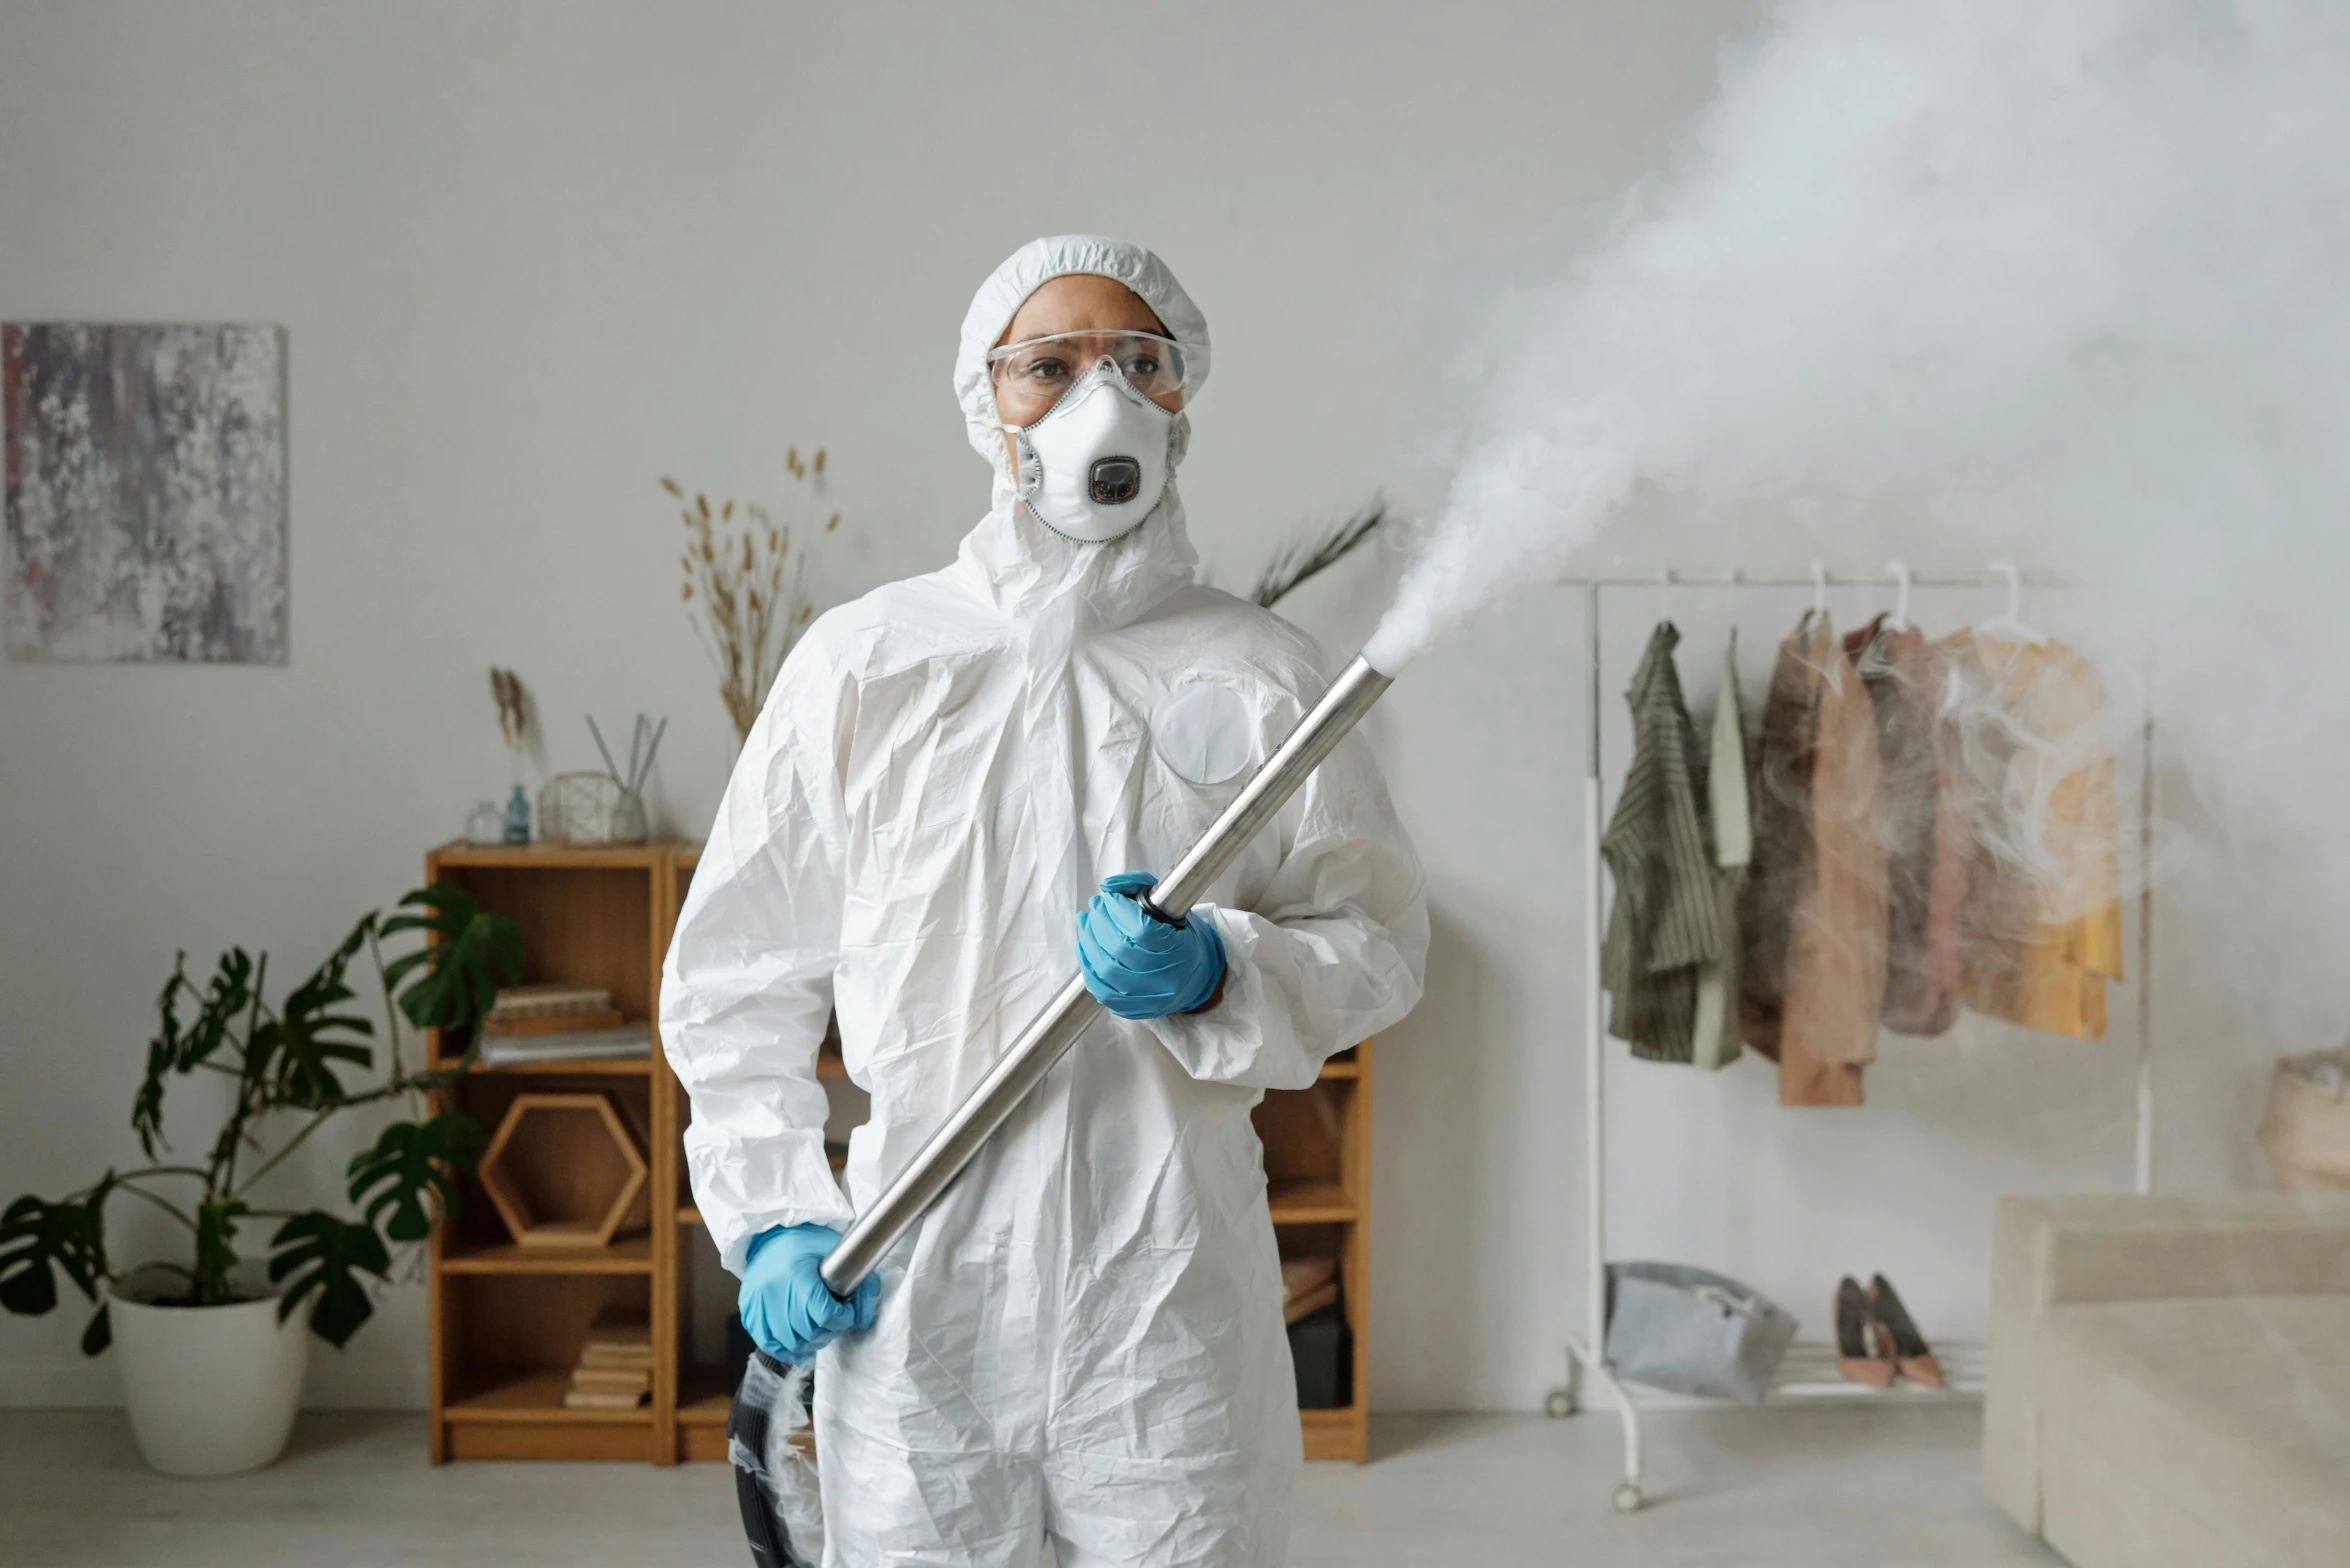 a man in a hazmat suit holding a stick with smoke coming out of it, pexels contest winner, sterile minimalistic room, avatar image, wearing plumber uniform, wearing lab coat and a blouse